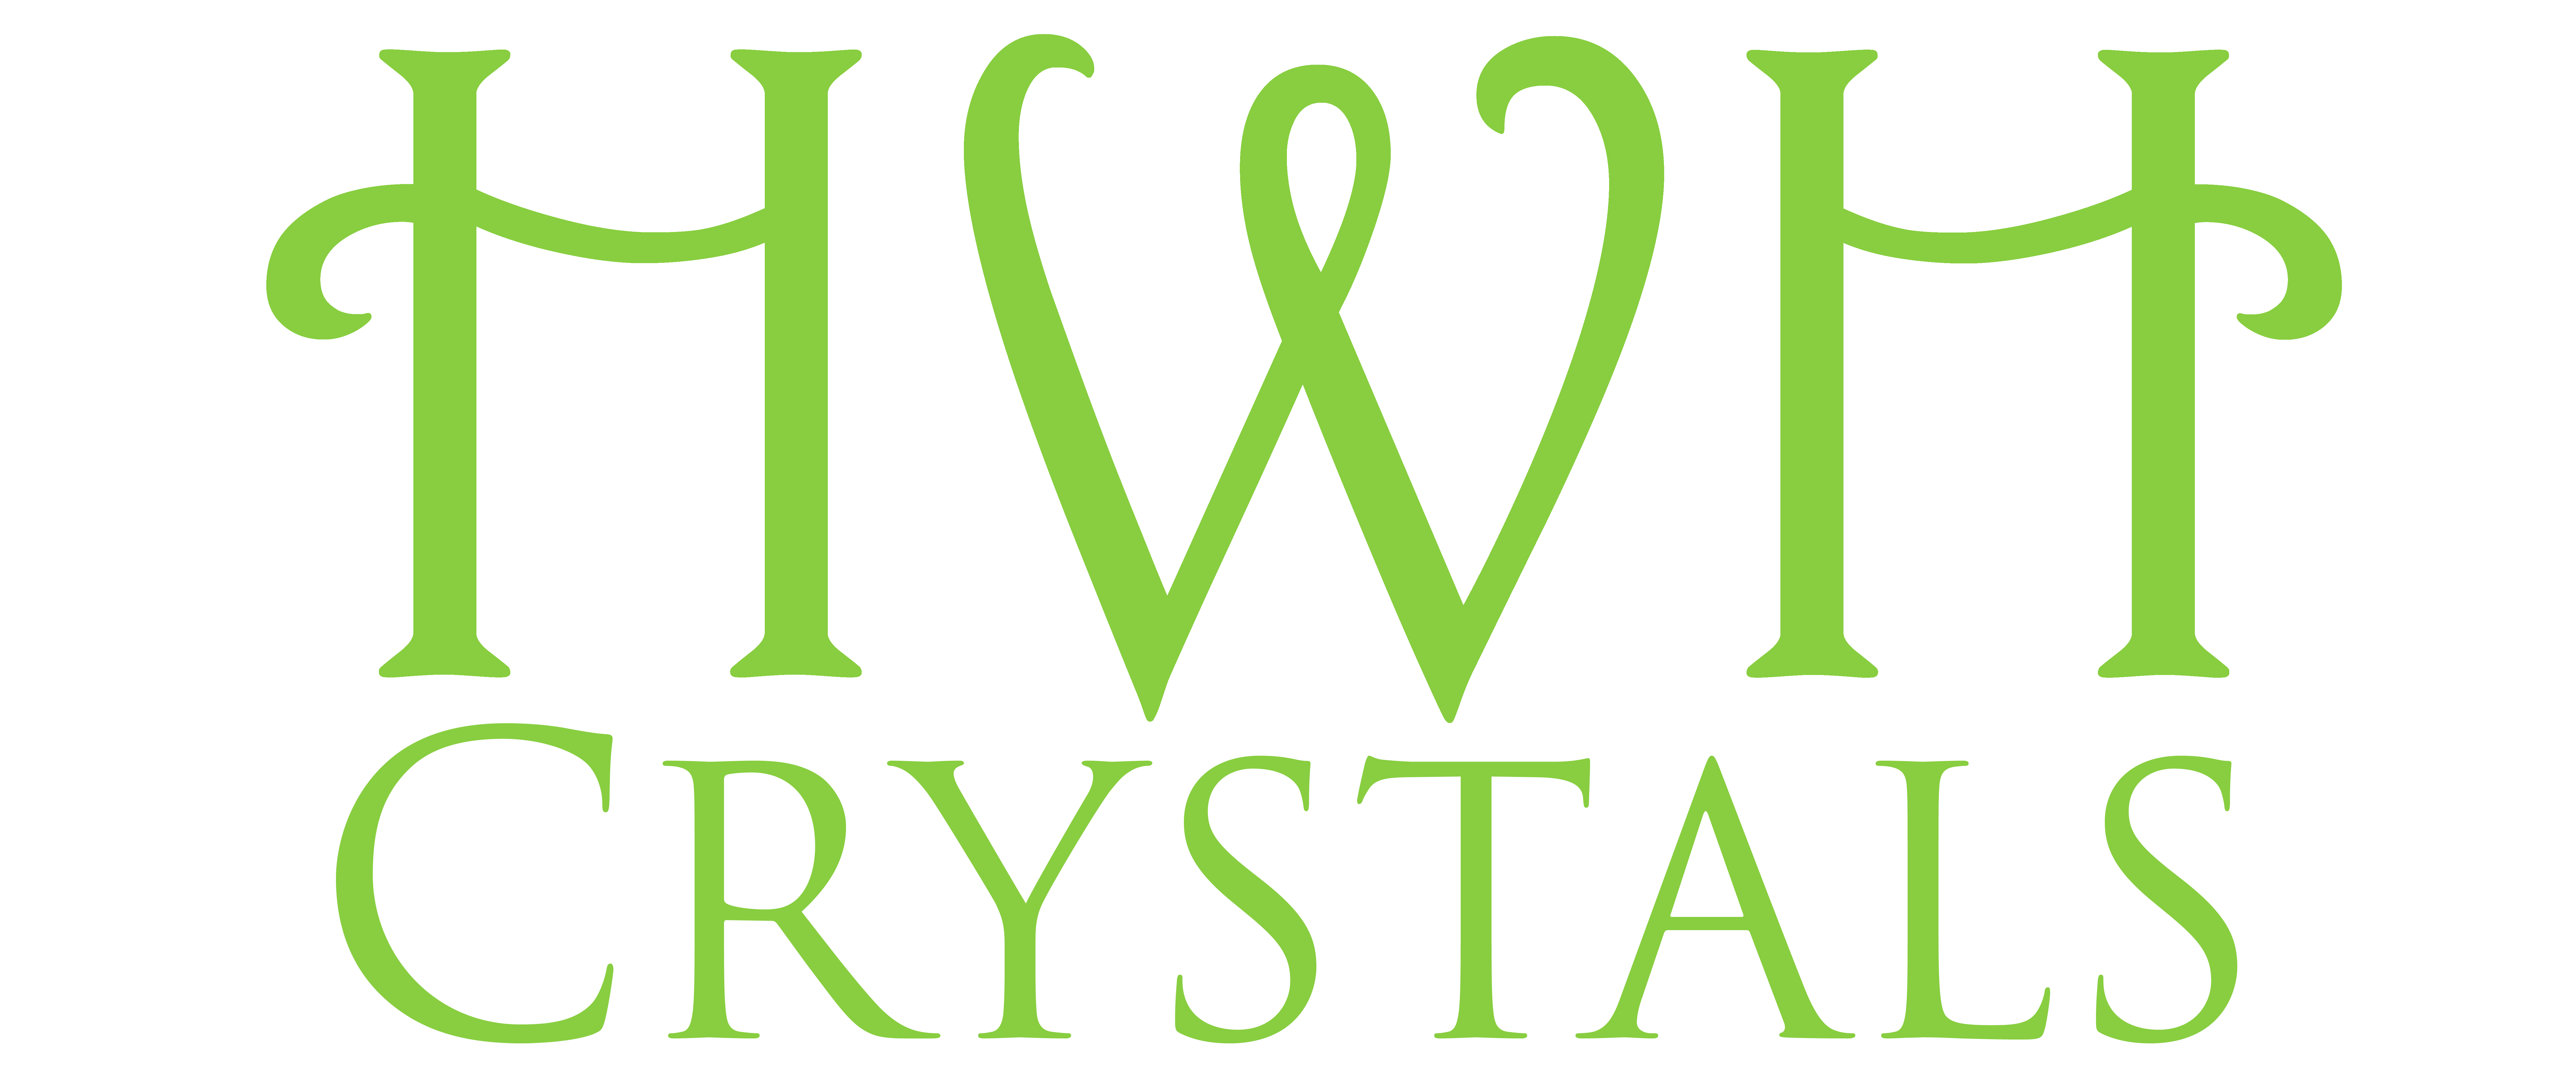 Forster Wellness Group Pty. Ltd. T/as HWH Crystals logo